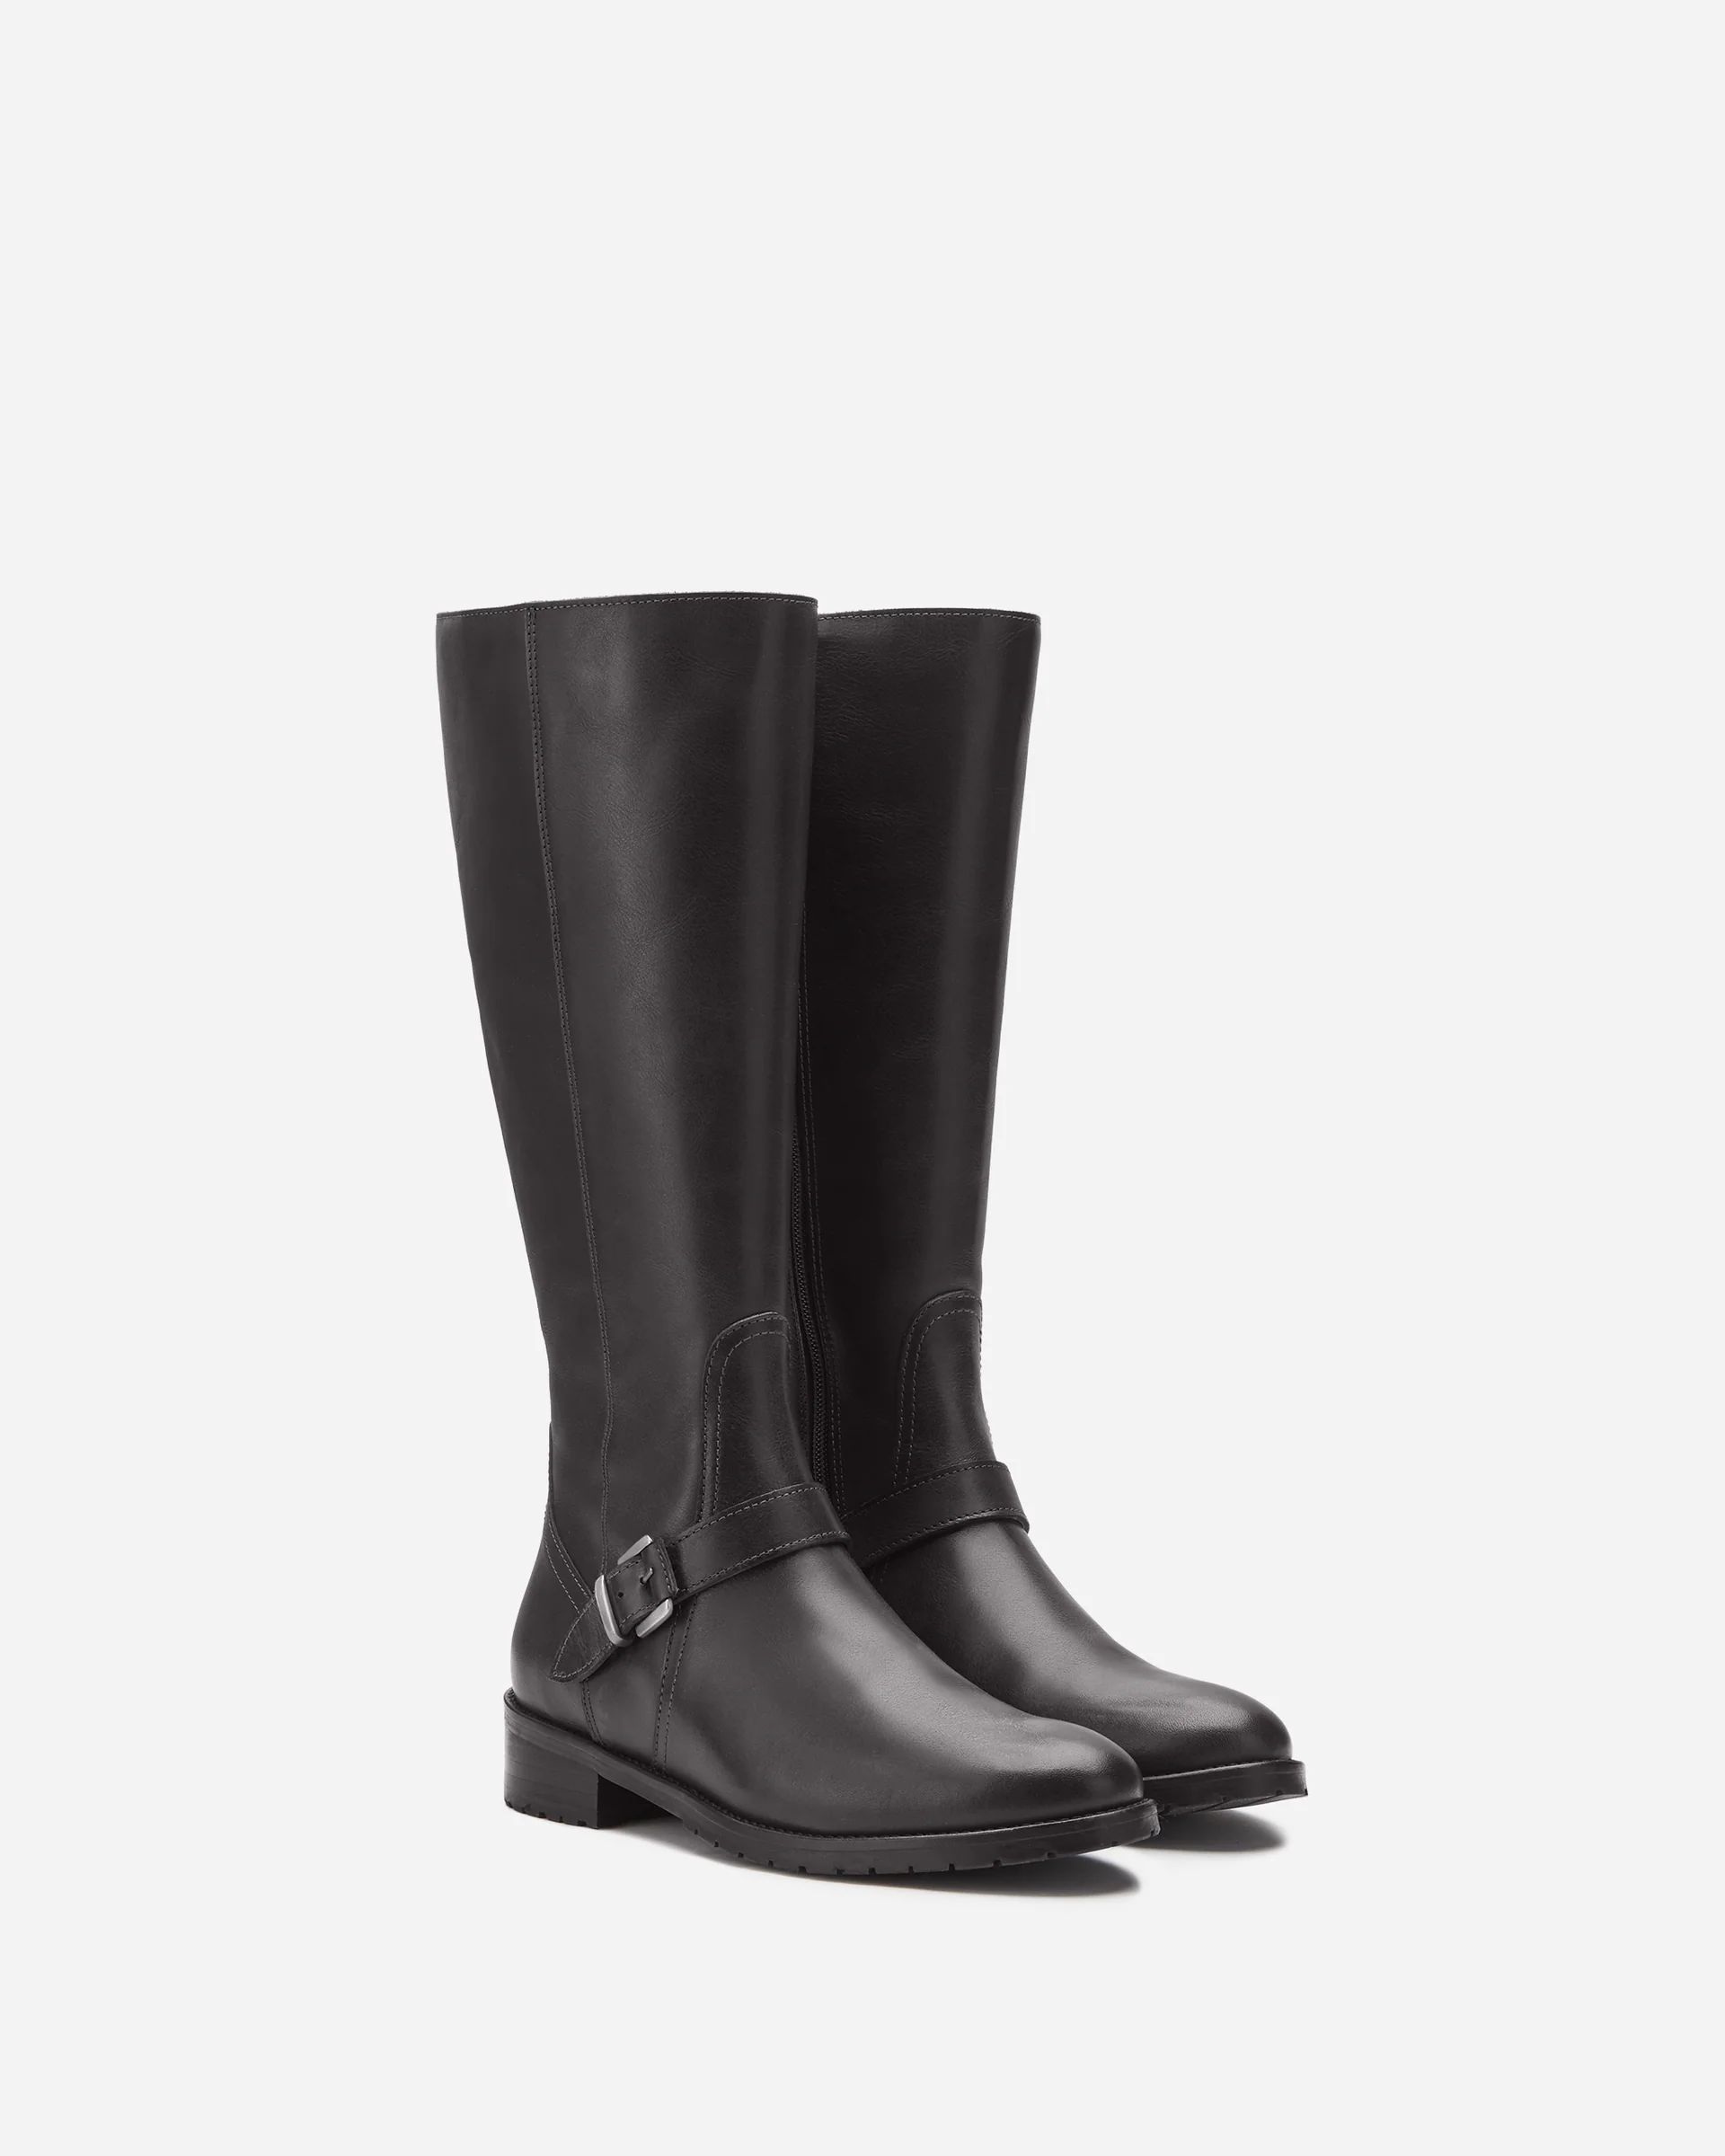 Charlotte Knee High Boots in Black Leather | DuoBoots